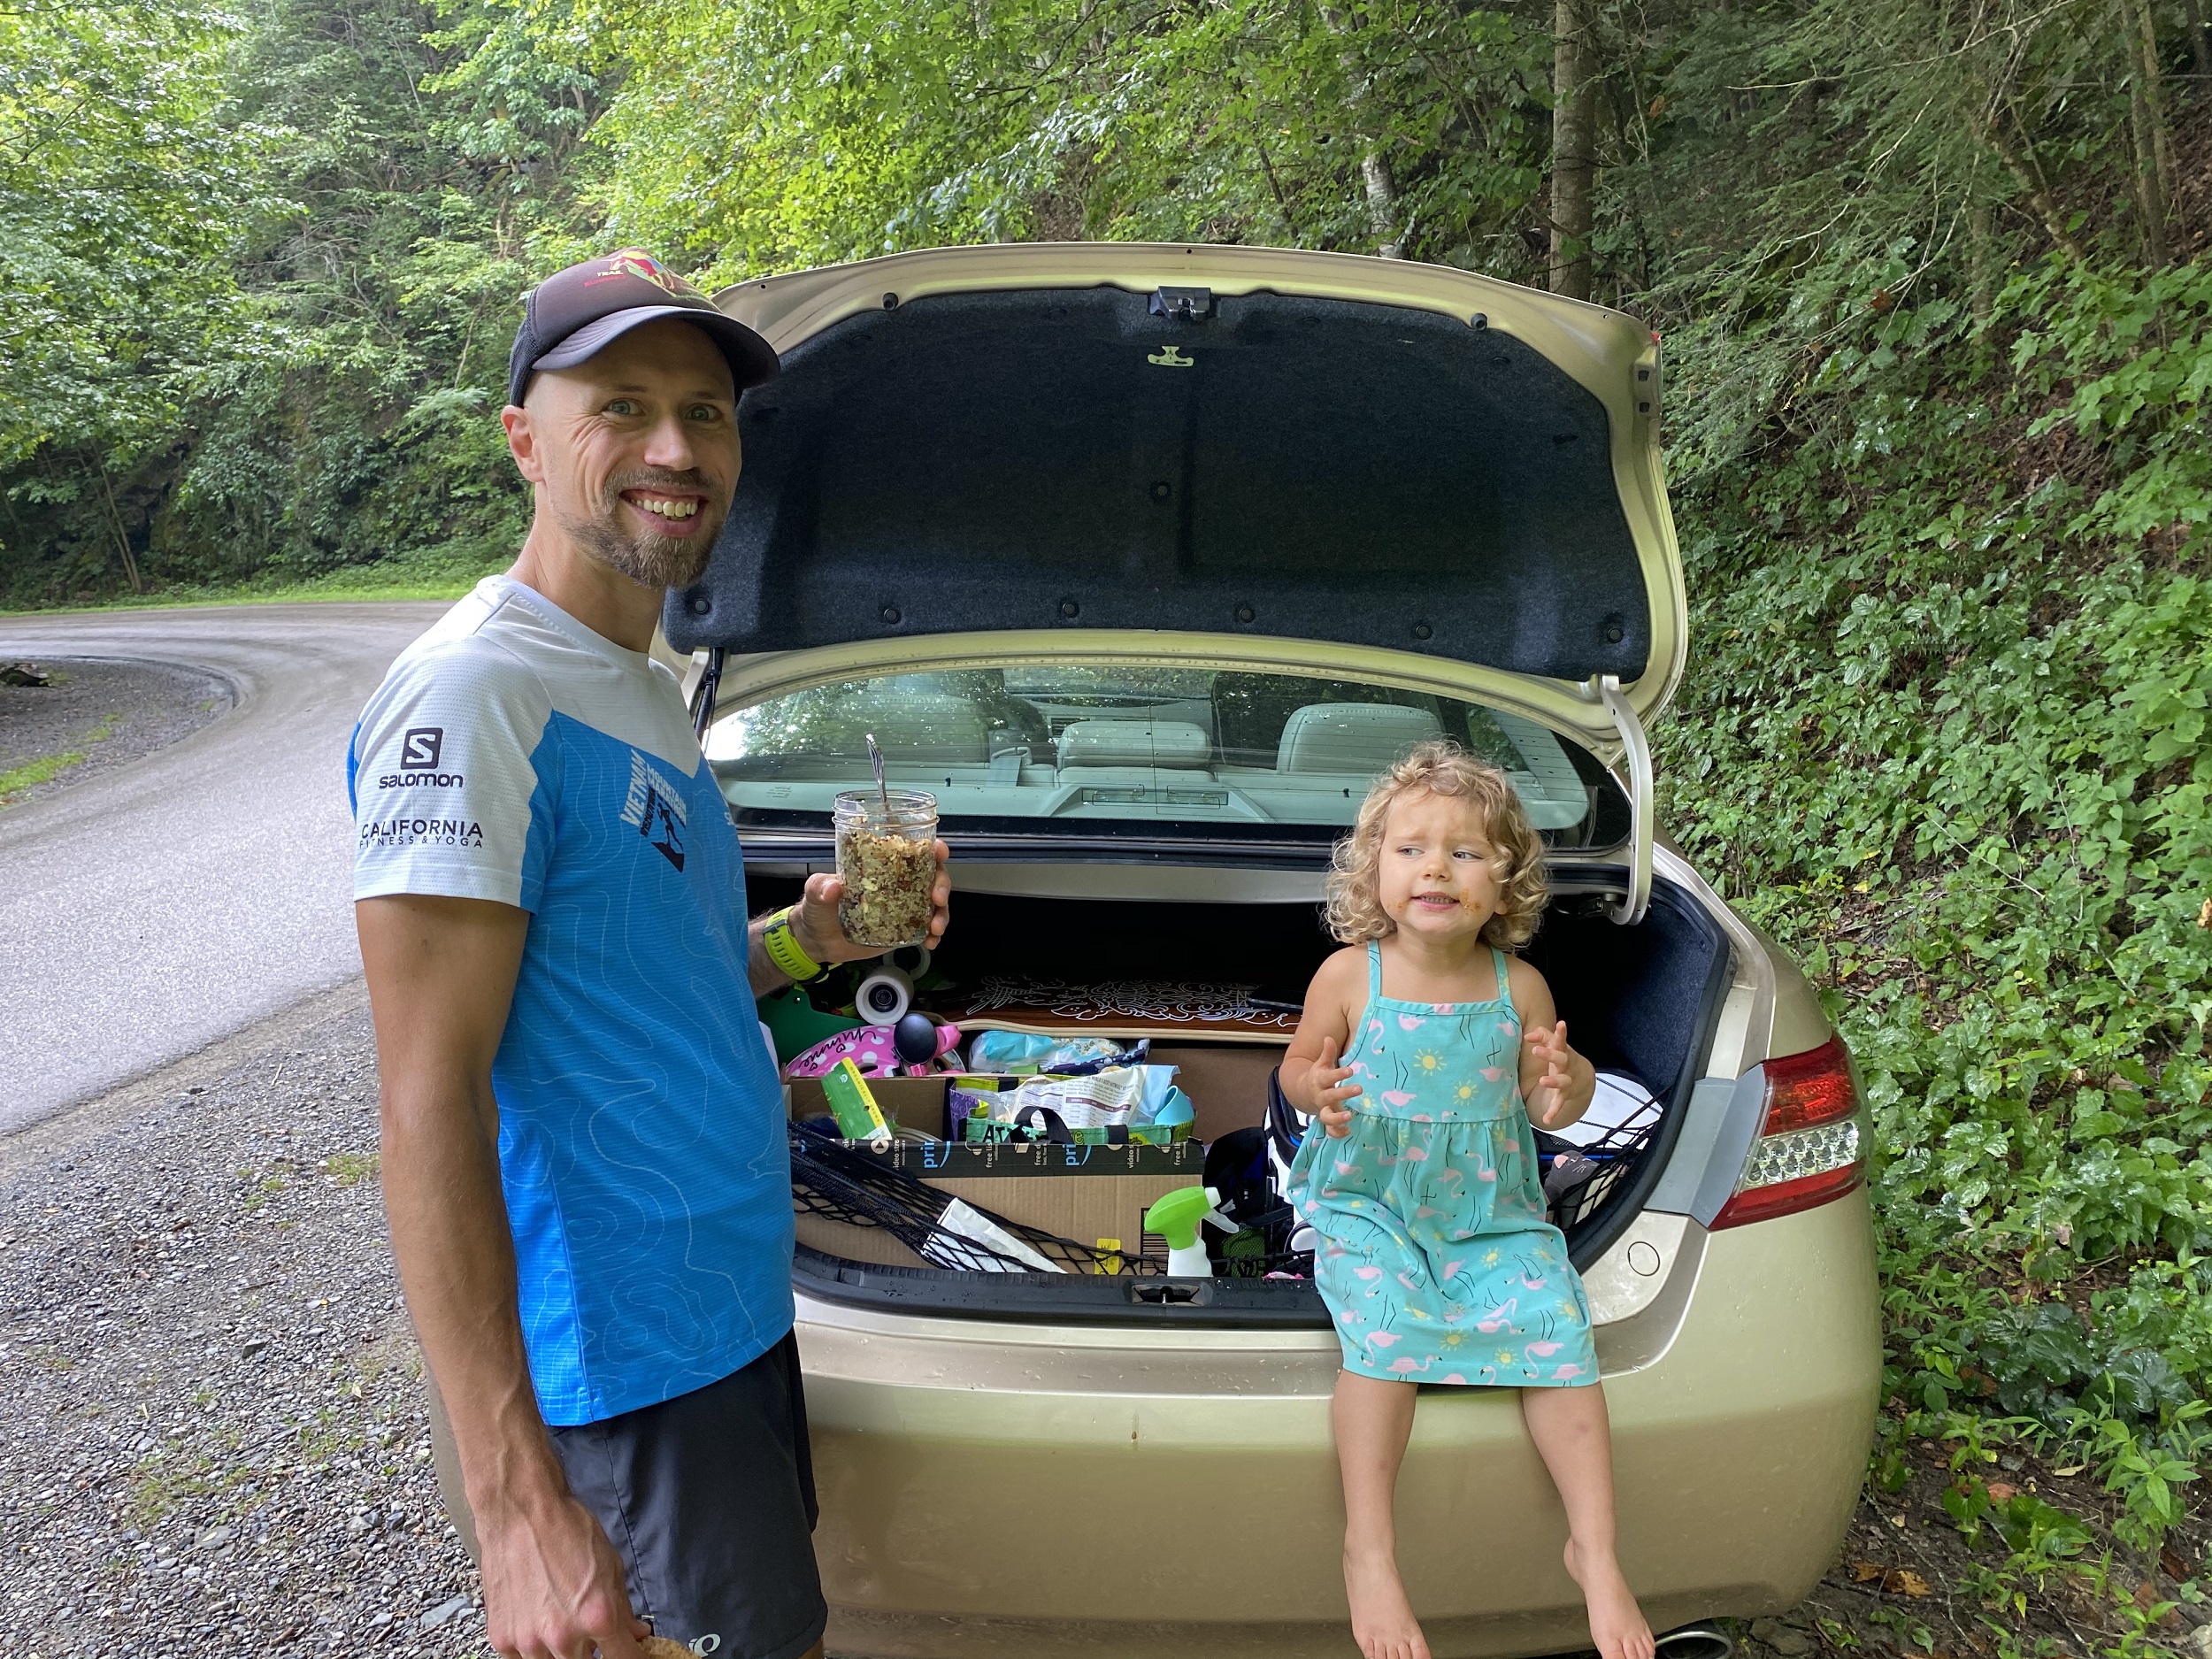 Stopping for a self-packed lunch on a road trip with a toddler